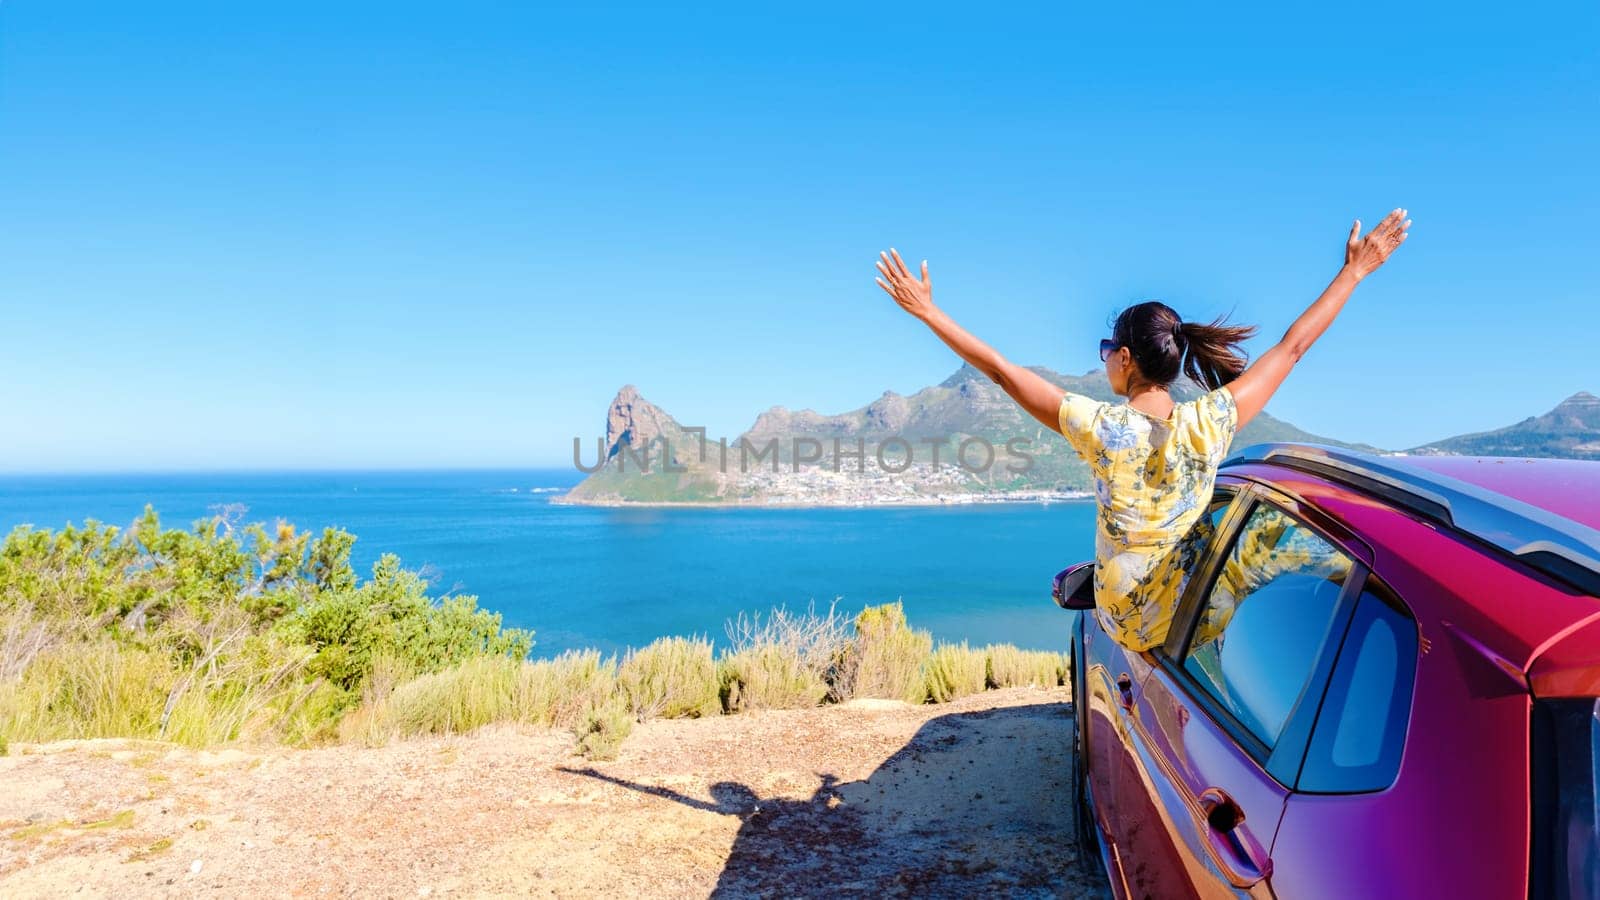 woman outside a car window with hands up, a car at Chapman's Peak Drive in Cape Town South Africa looking out over the ocean. women on a road trip at the garden route South Africa with a renal car